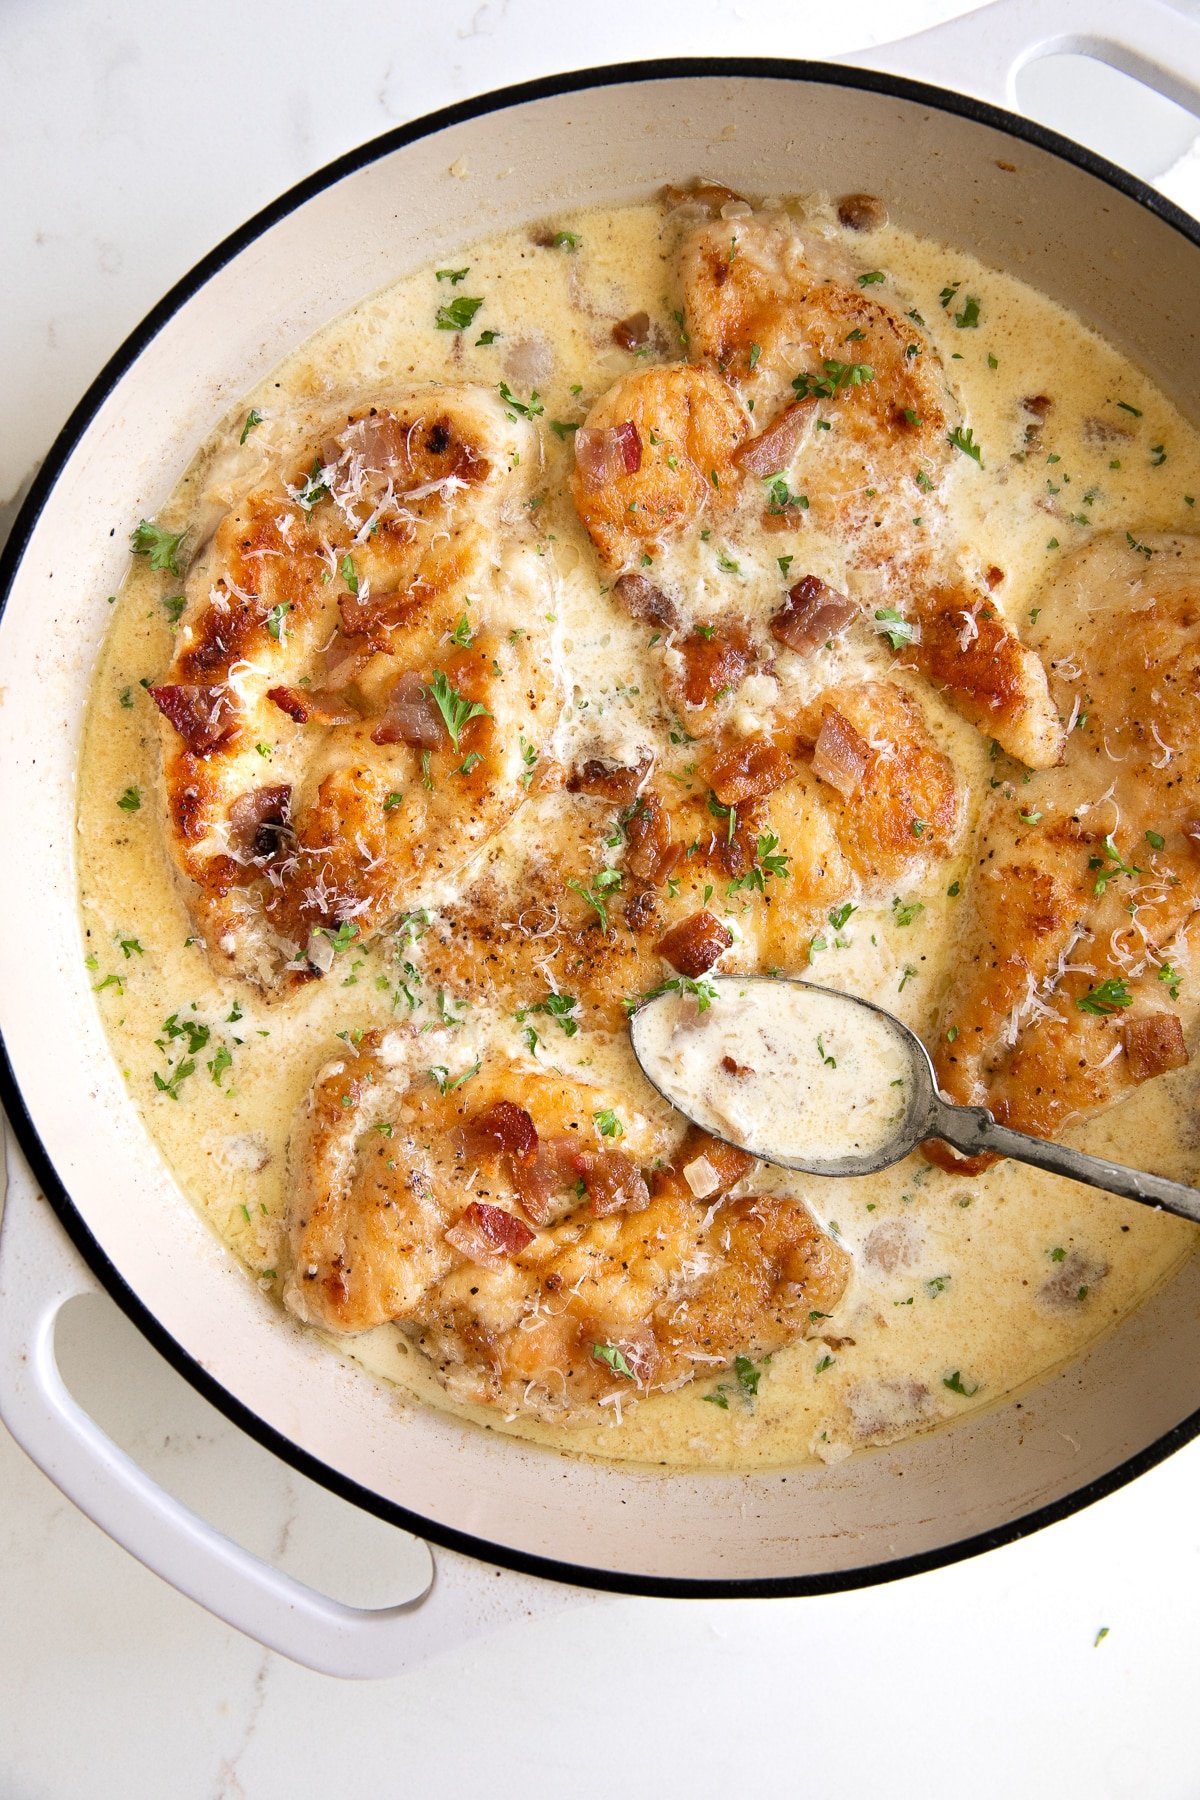 Overhead image of a large skillet filled with seared chicken breast cutlets simmering in a homemade cream sauce with bacon.